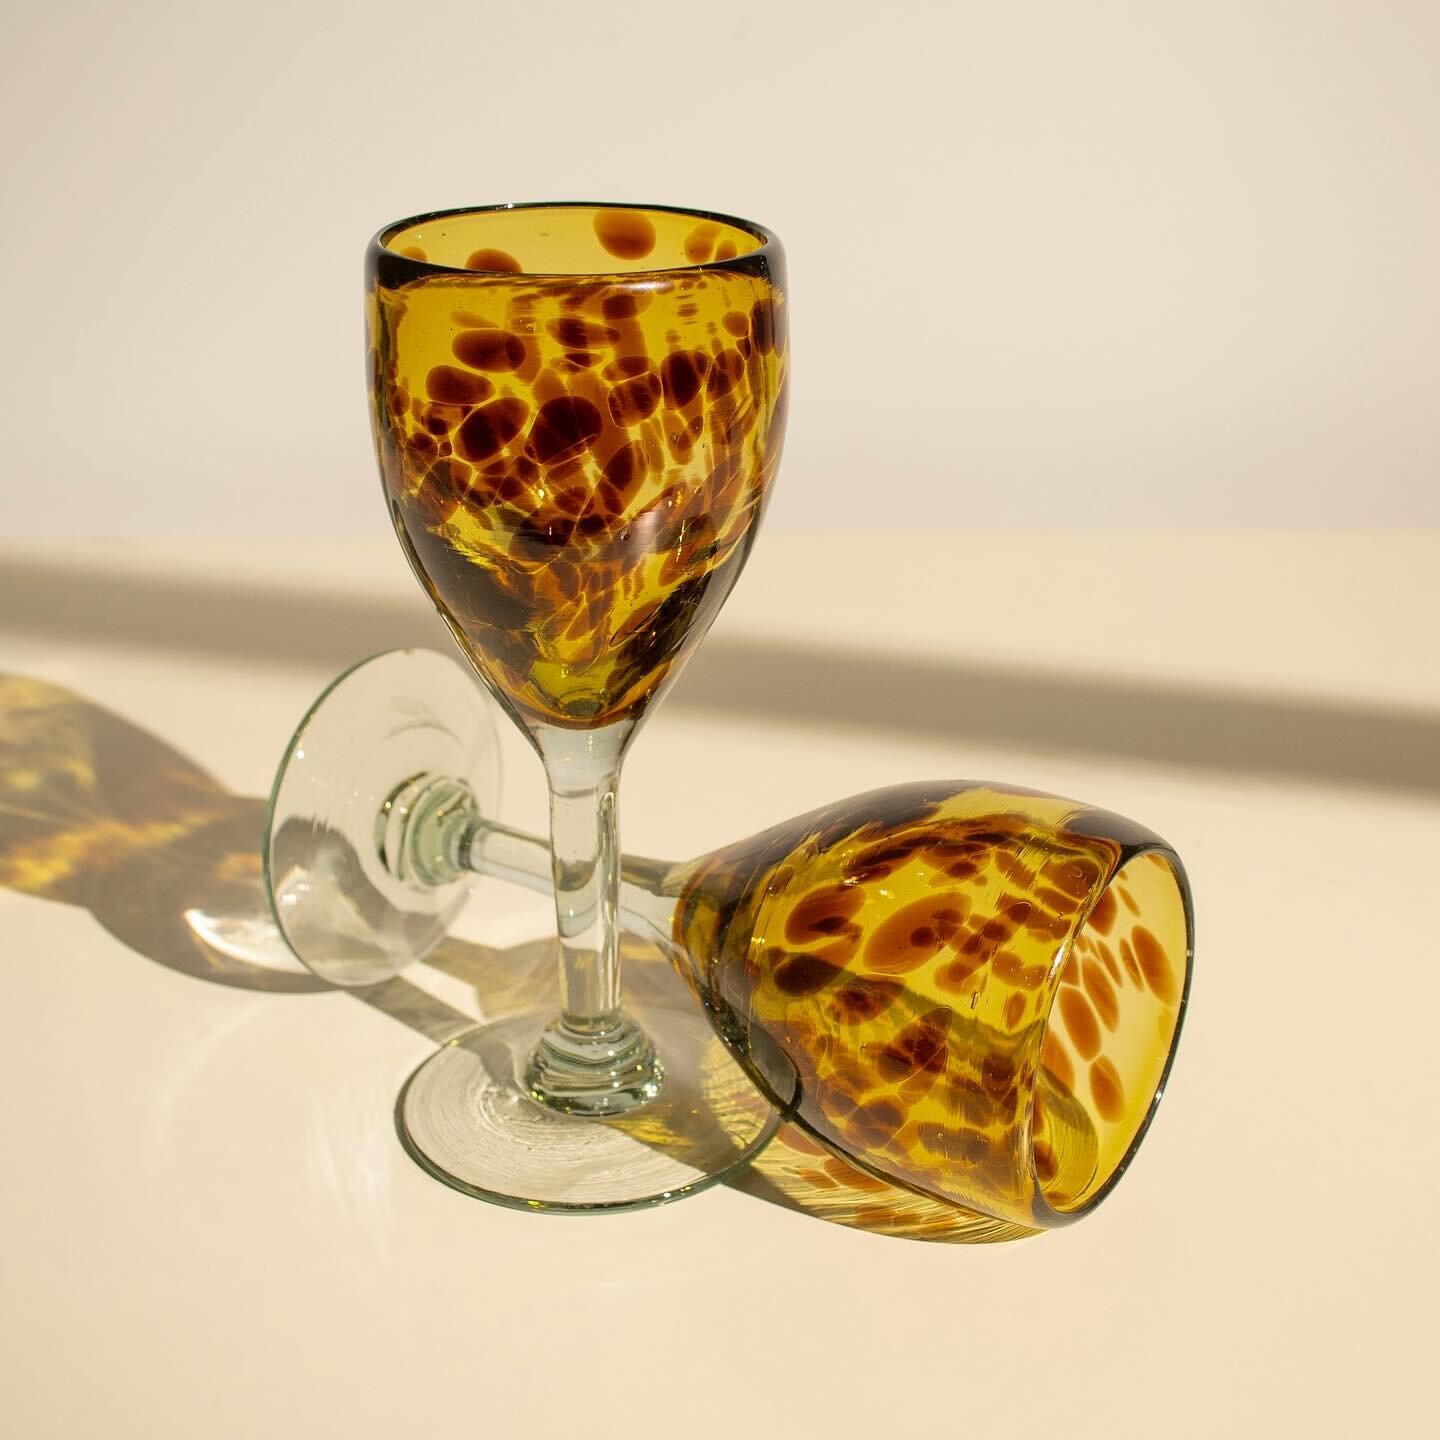 Set of two hand blown tortoise pattern wine glasses 🤎

$45 + shipping 

Purchase on our website (link in bio) or DM us with email and zipcode. US shipping or free local Brooklyn pickup available. All sales are final.